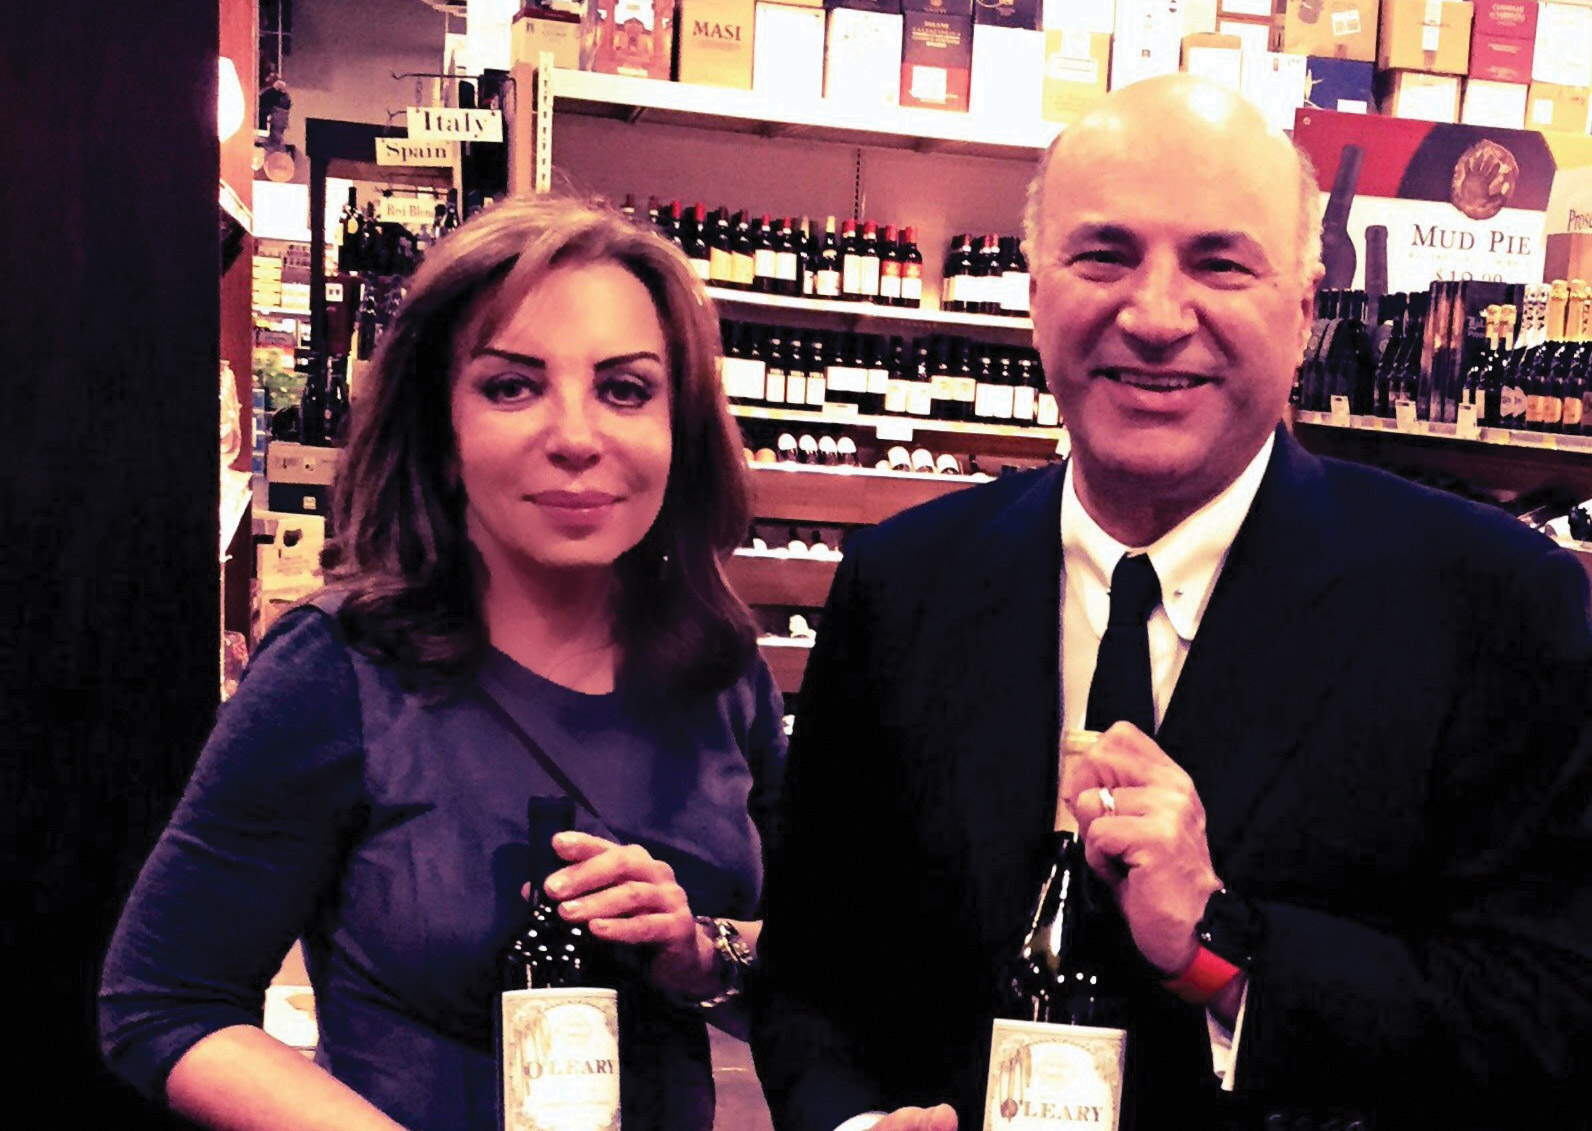 Anne Marie Harrison with Kevin O'Leary standing in her wine store each holding a bottle of wine.